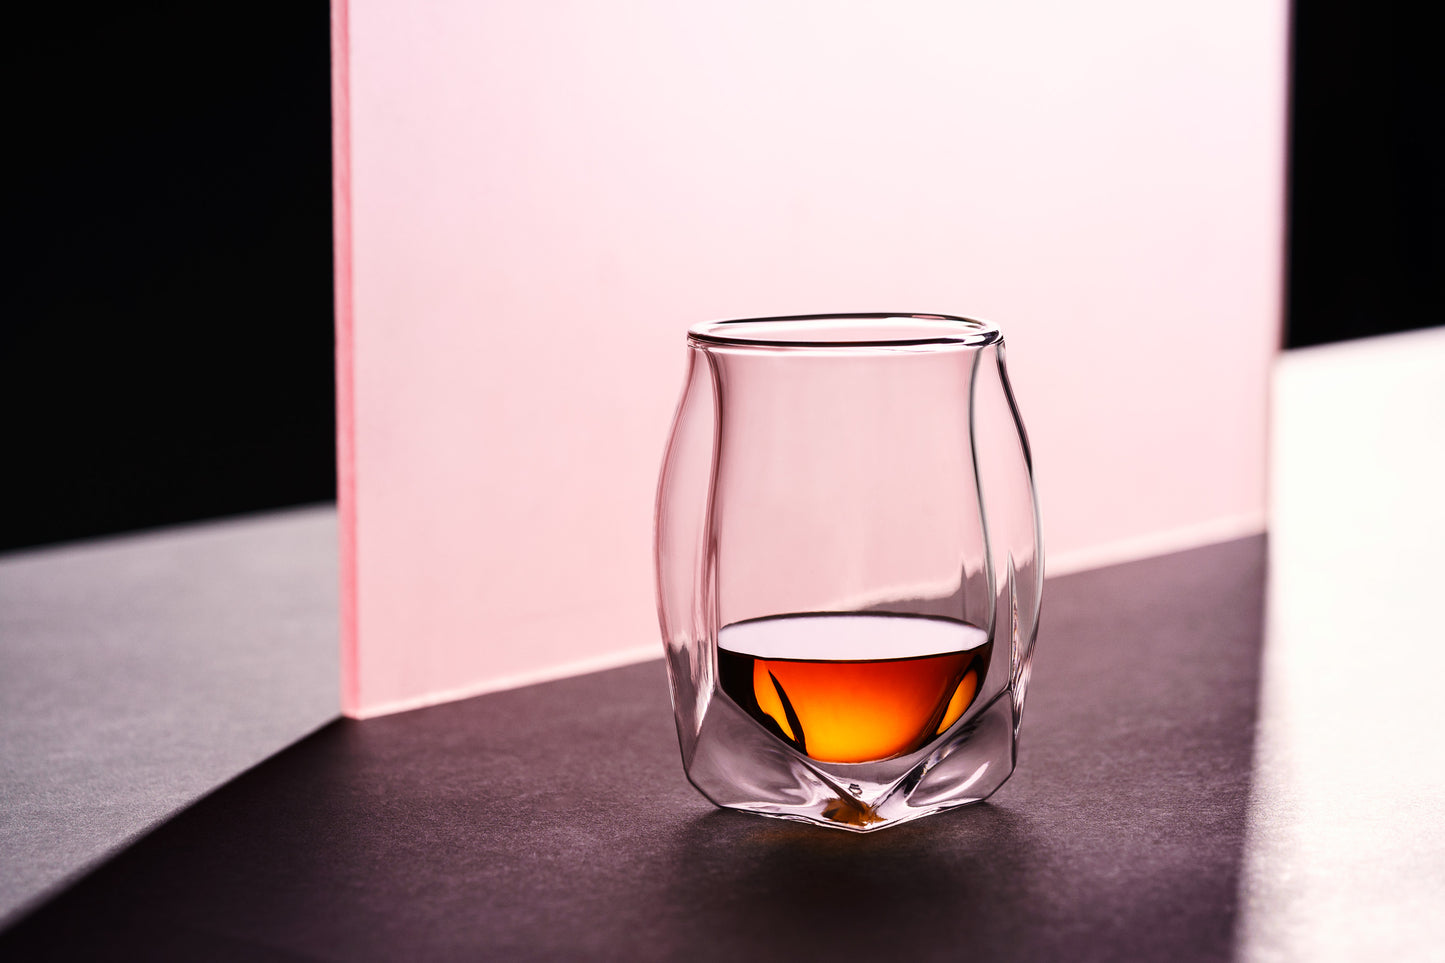 Norlan Whisky Glass